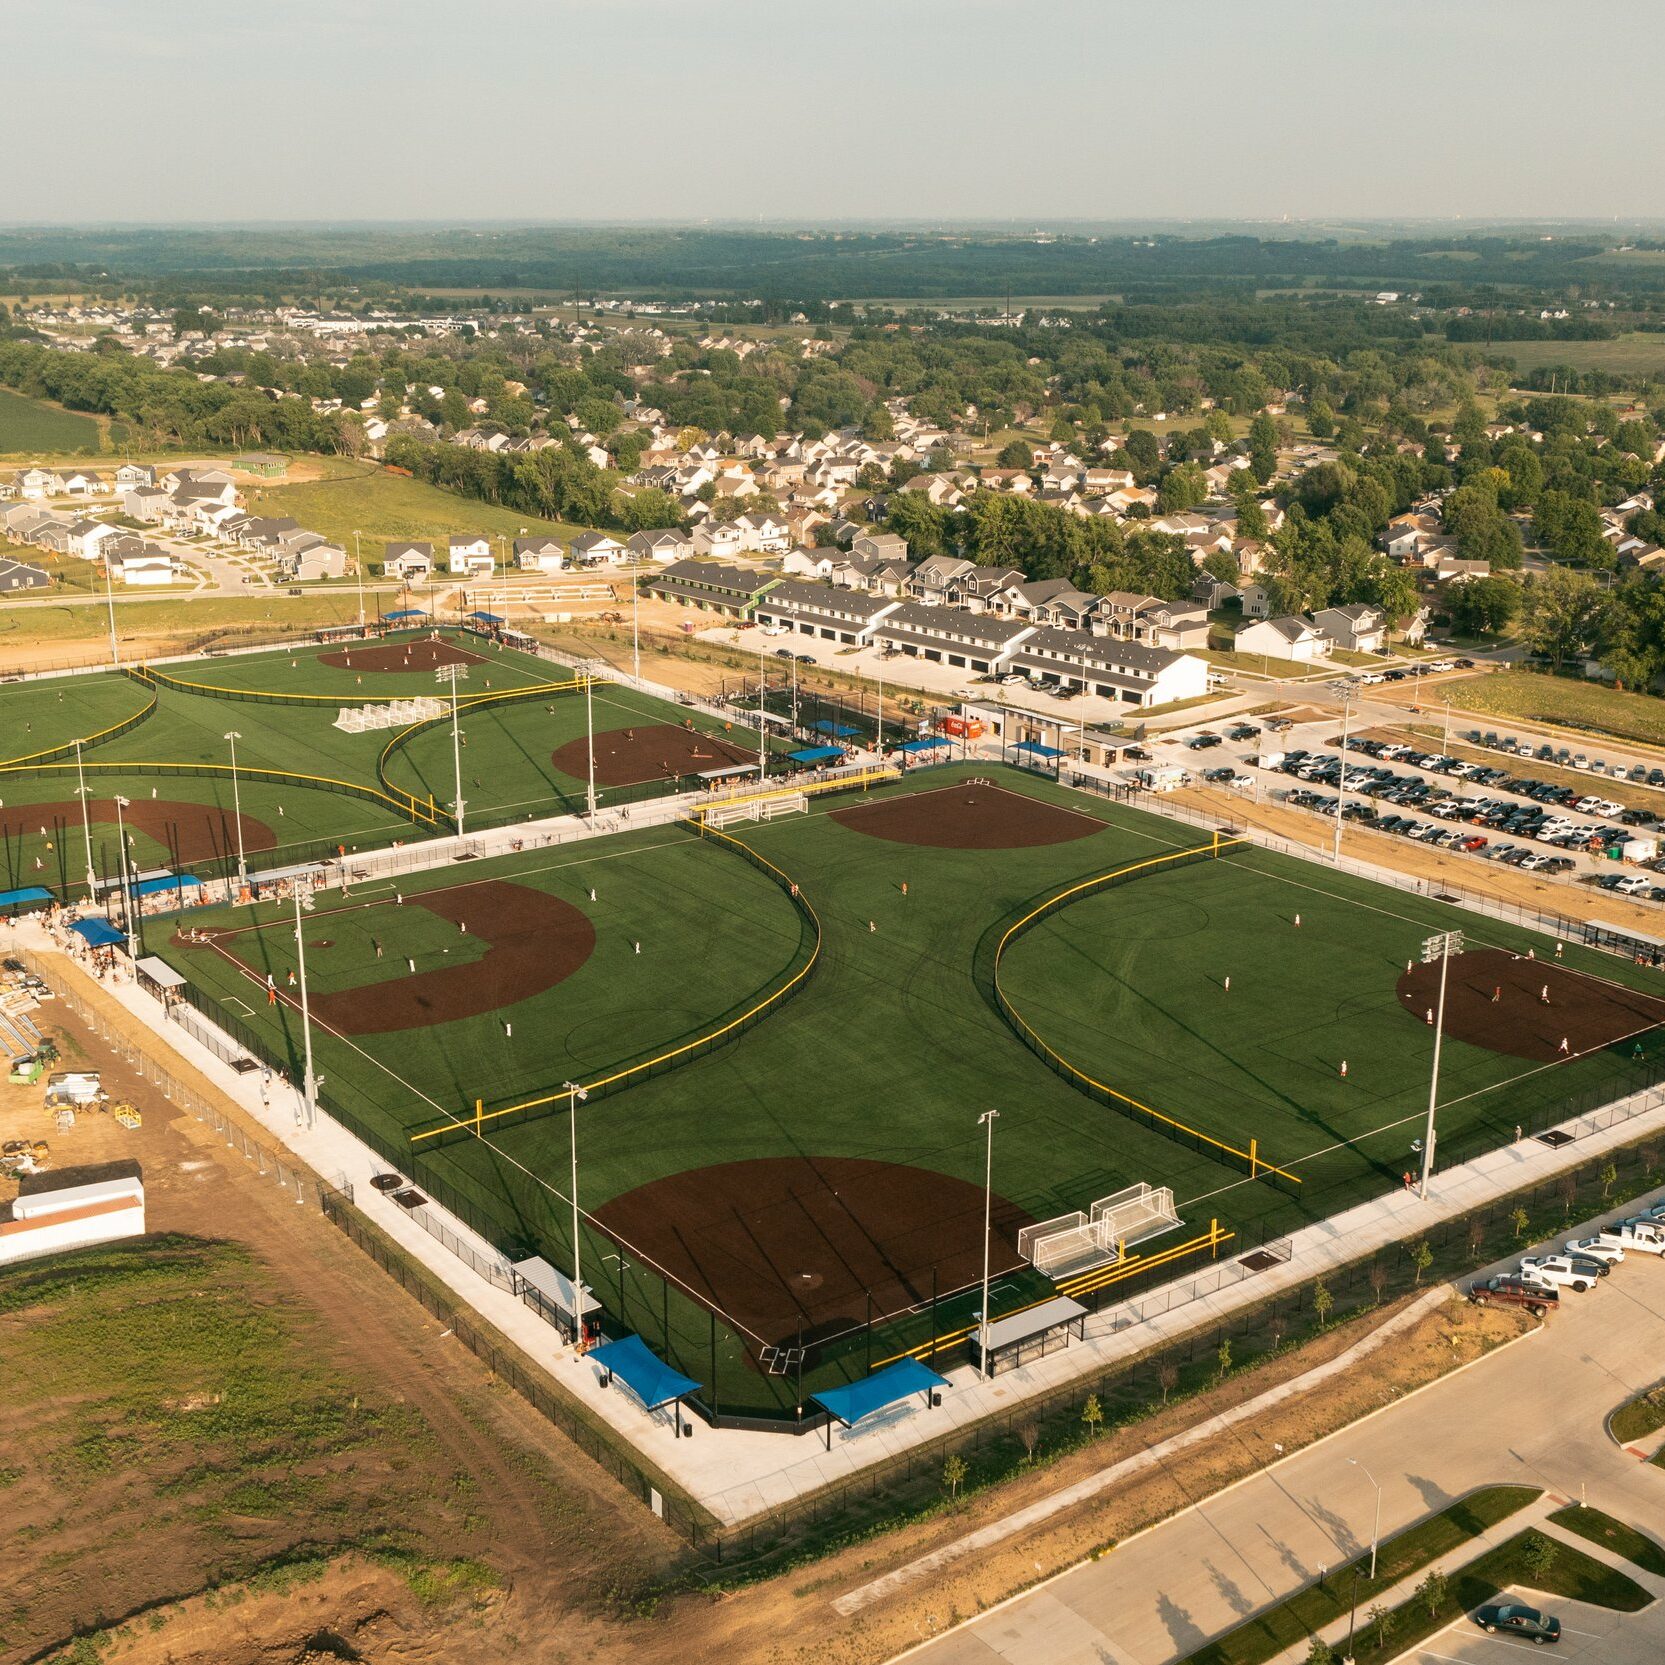 Fareway Fields at The Gregg Young Sports Campus